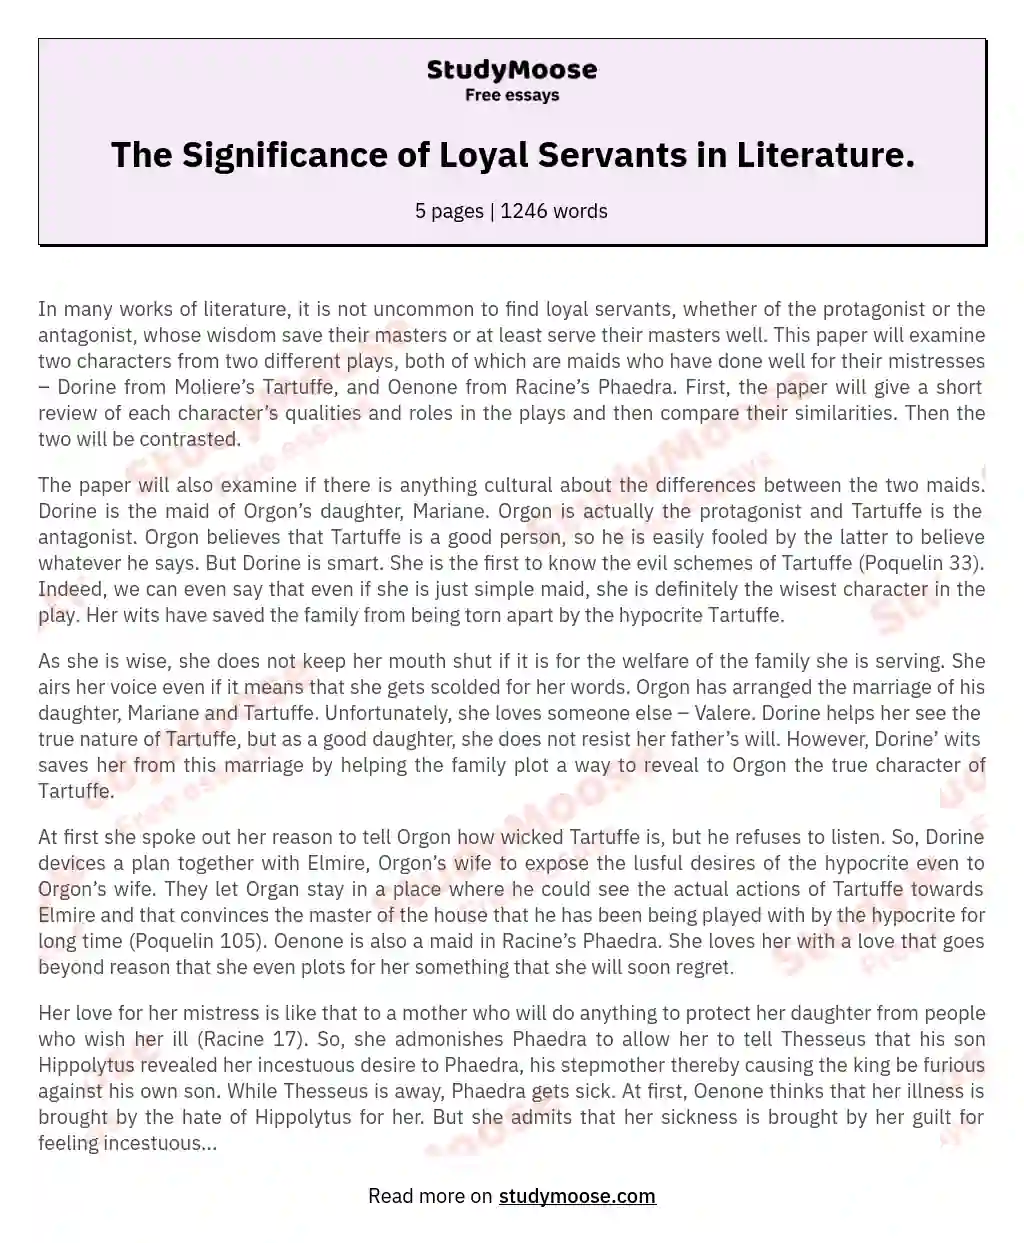 The Significance of Loyal Servants in Literature. essay